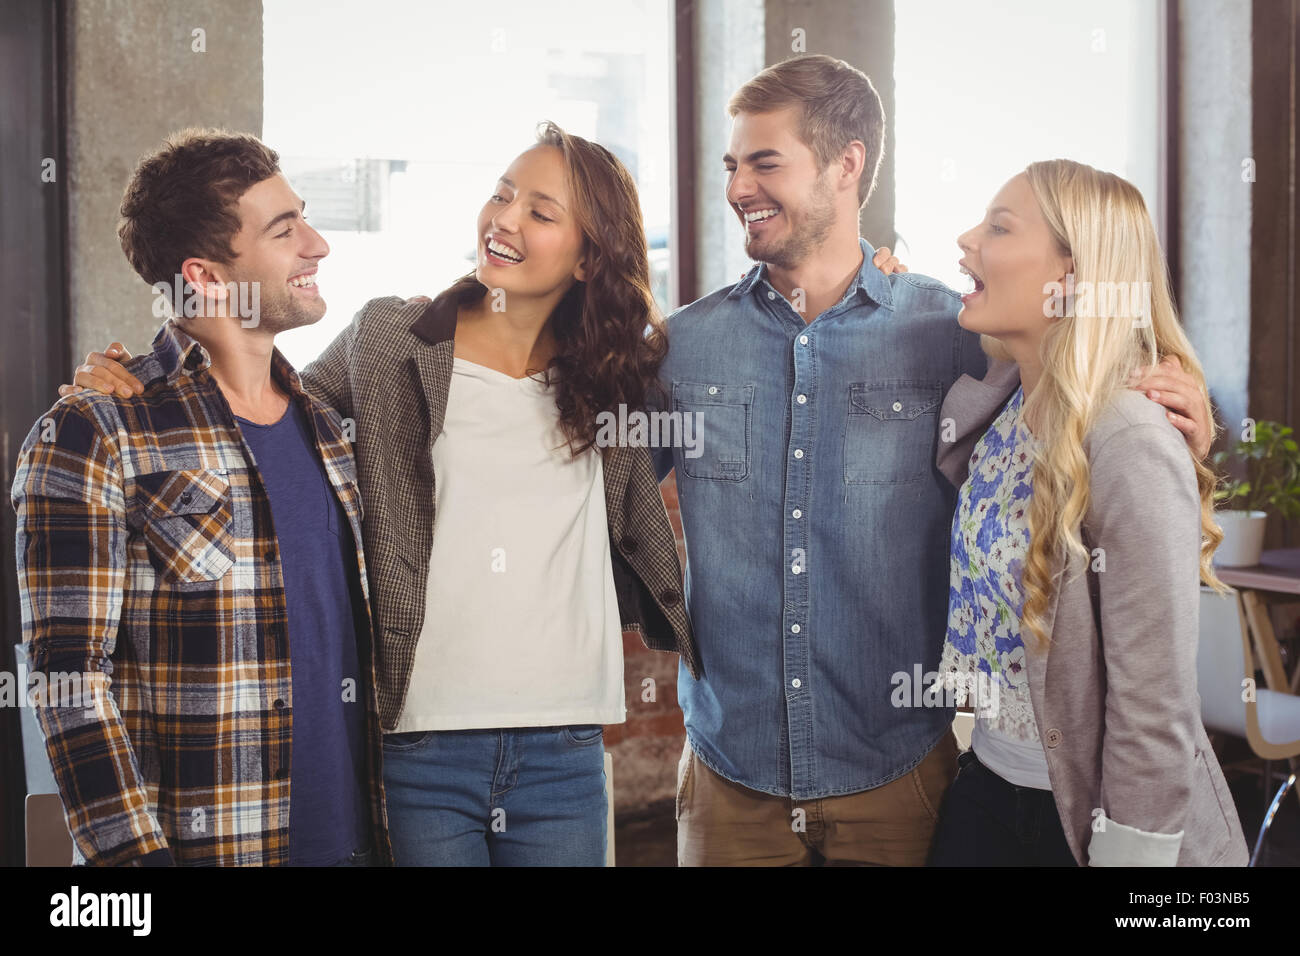 Smiling friends laughing and putting arms around each other Stock Photo